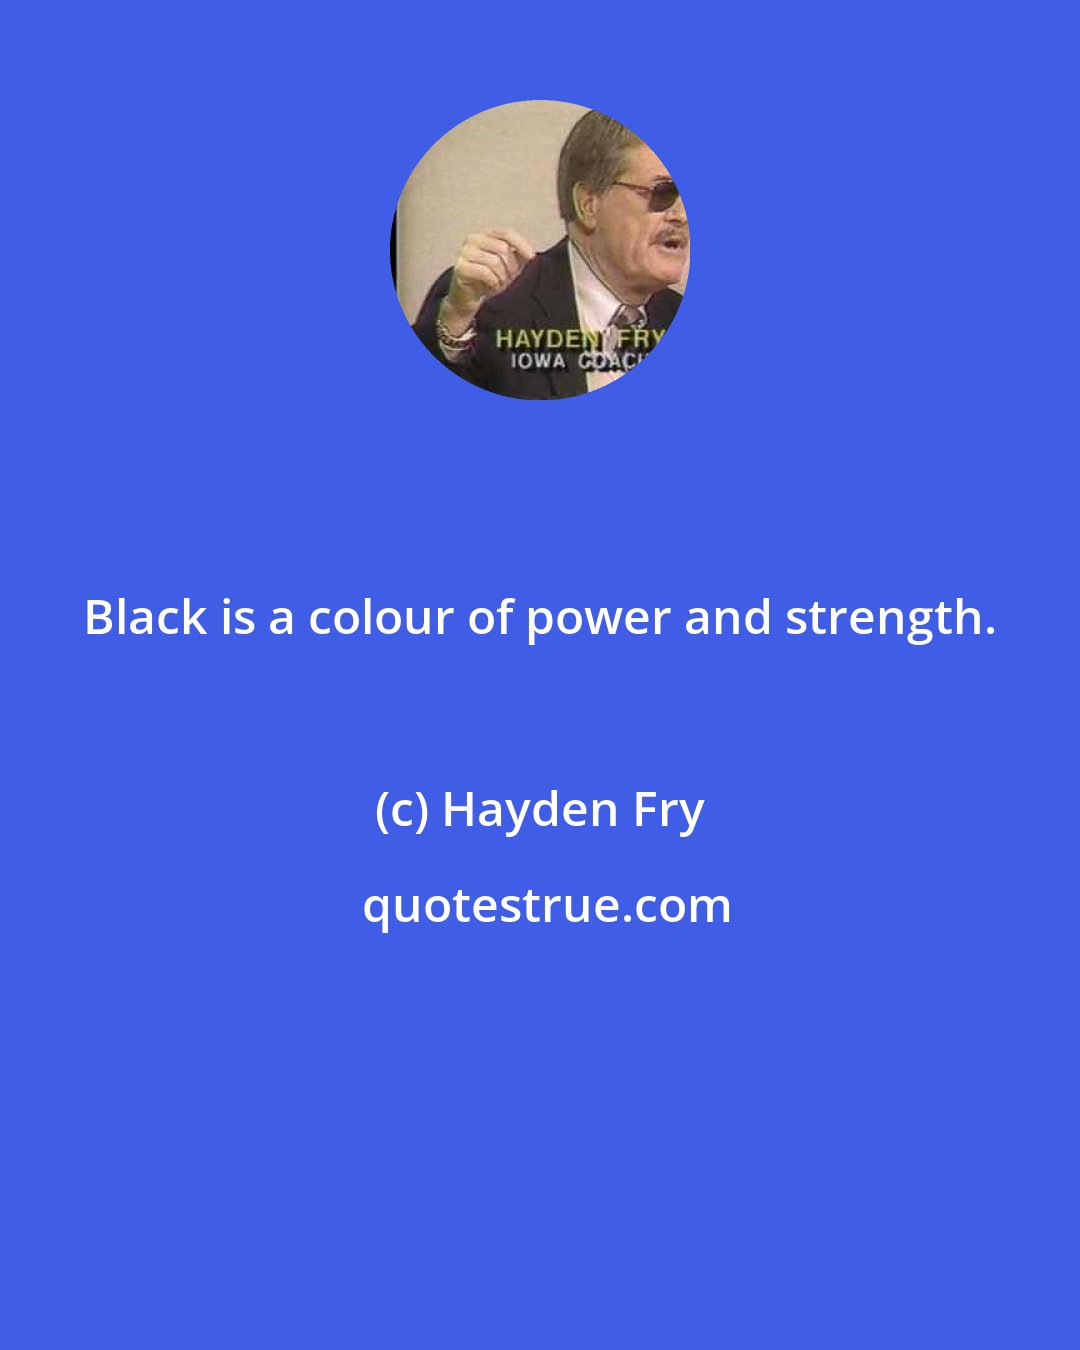 Hayden Fry: Black is a colour of power and strength.